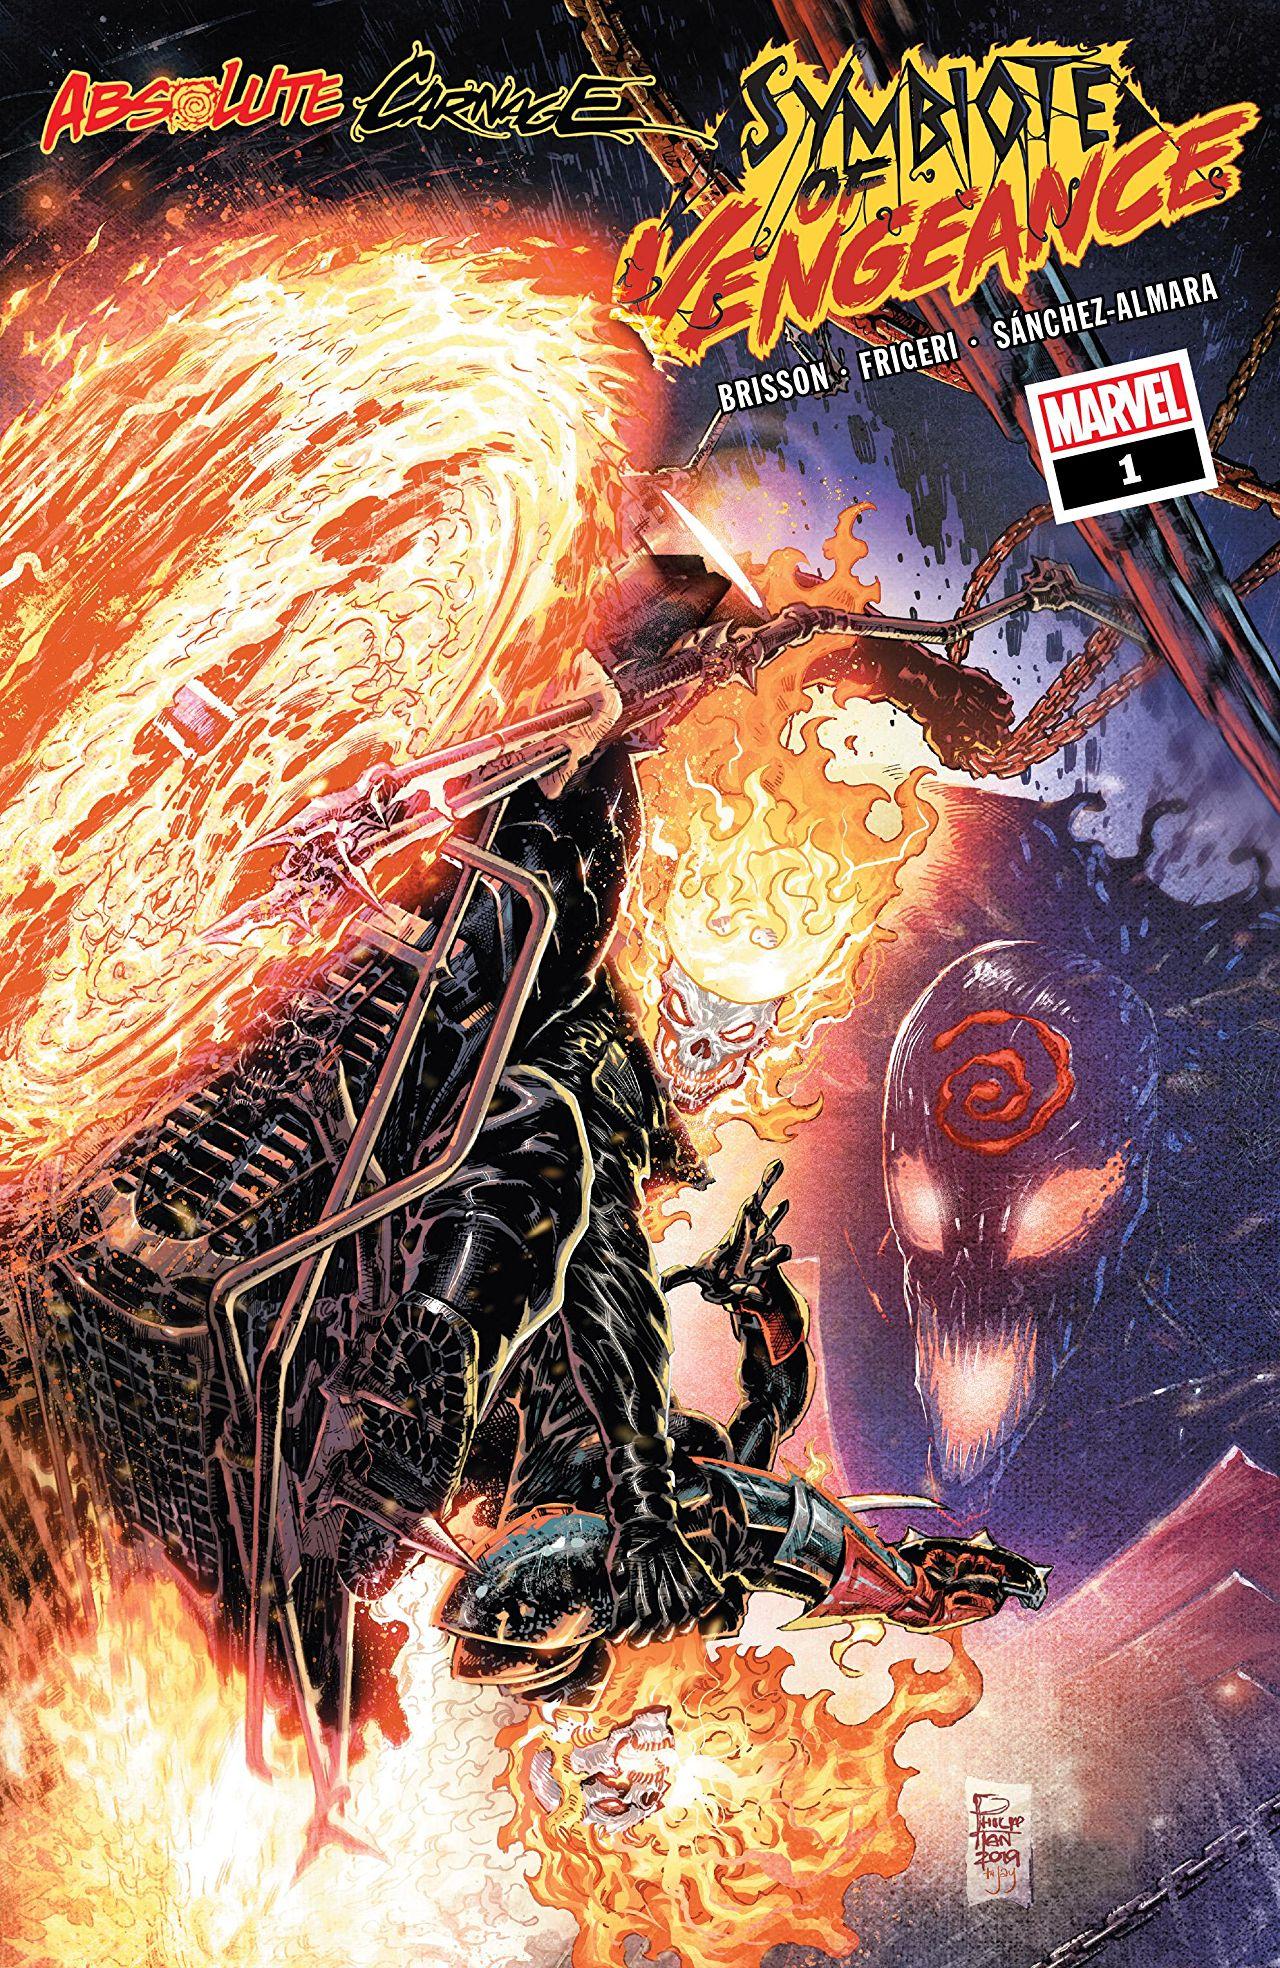 Absolute Carnage: Symbiote of Vengeance Vol. 1 #1